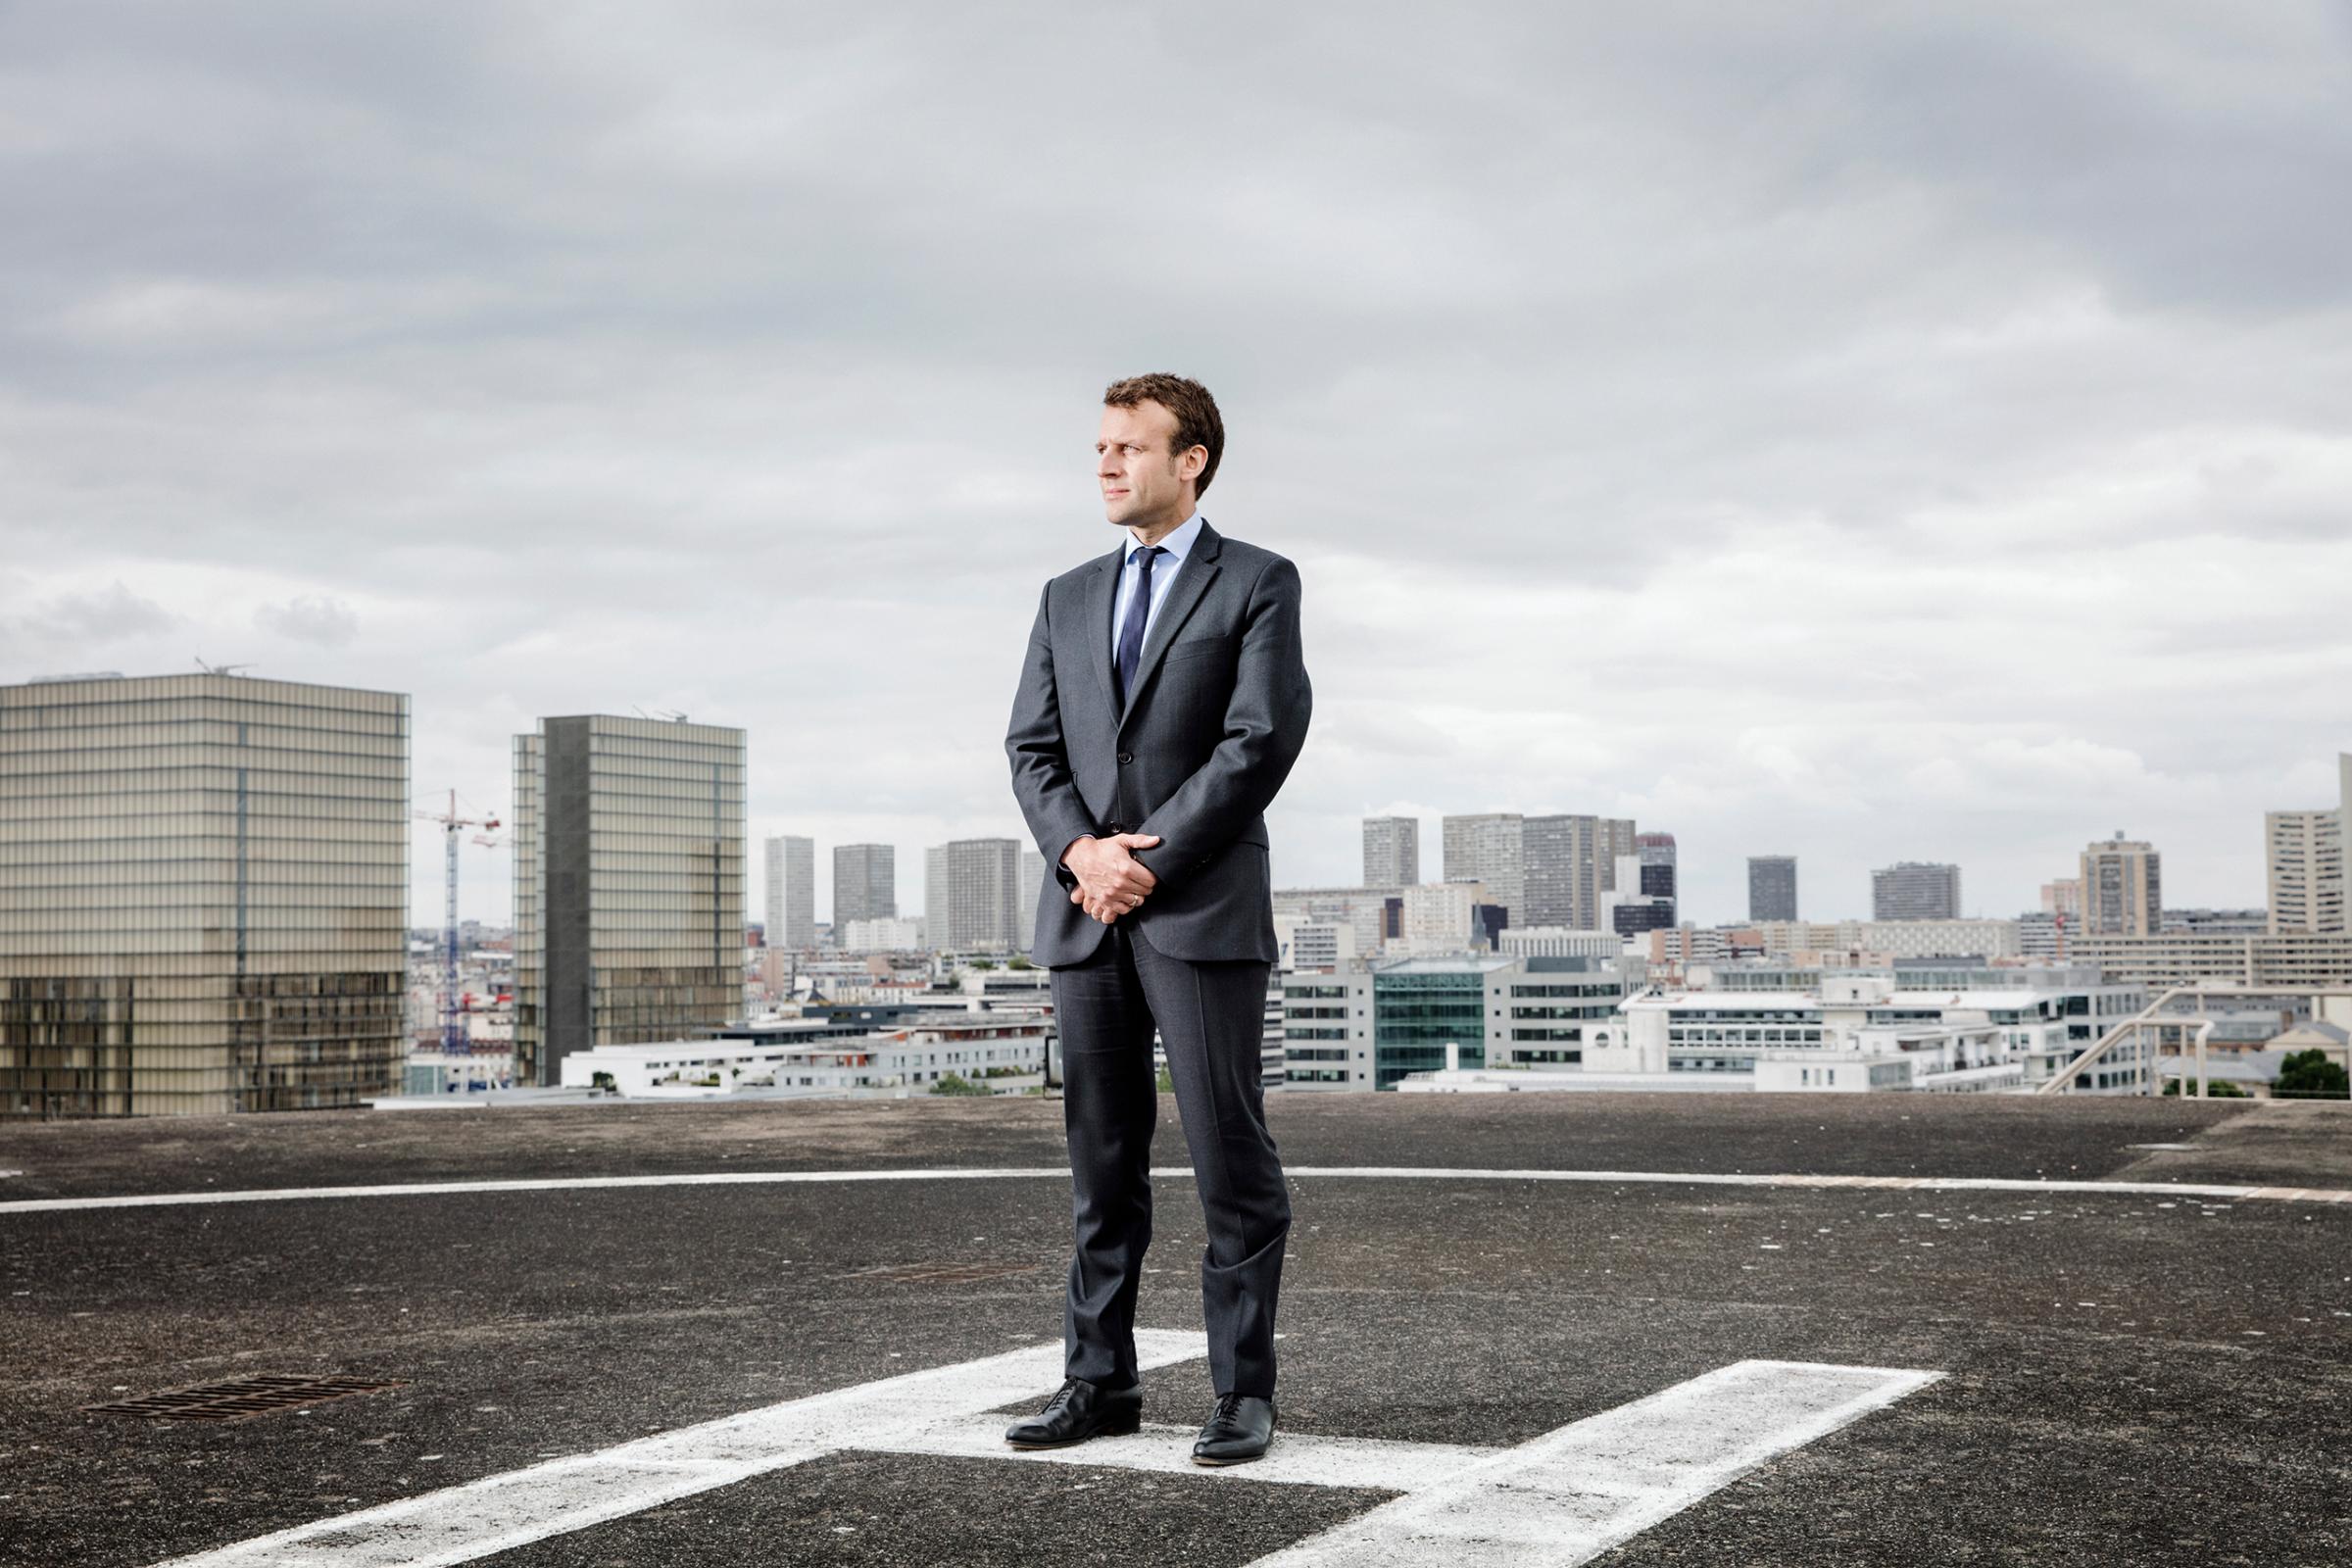 Emmanuel Macron, France's Minister for the Economy, Industry and Digital Affairs, on the heliport of the Ministry of Economy and Finance in Paris on June 13, 2016.